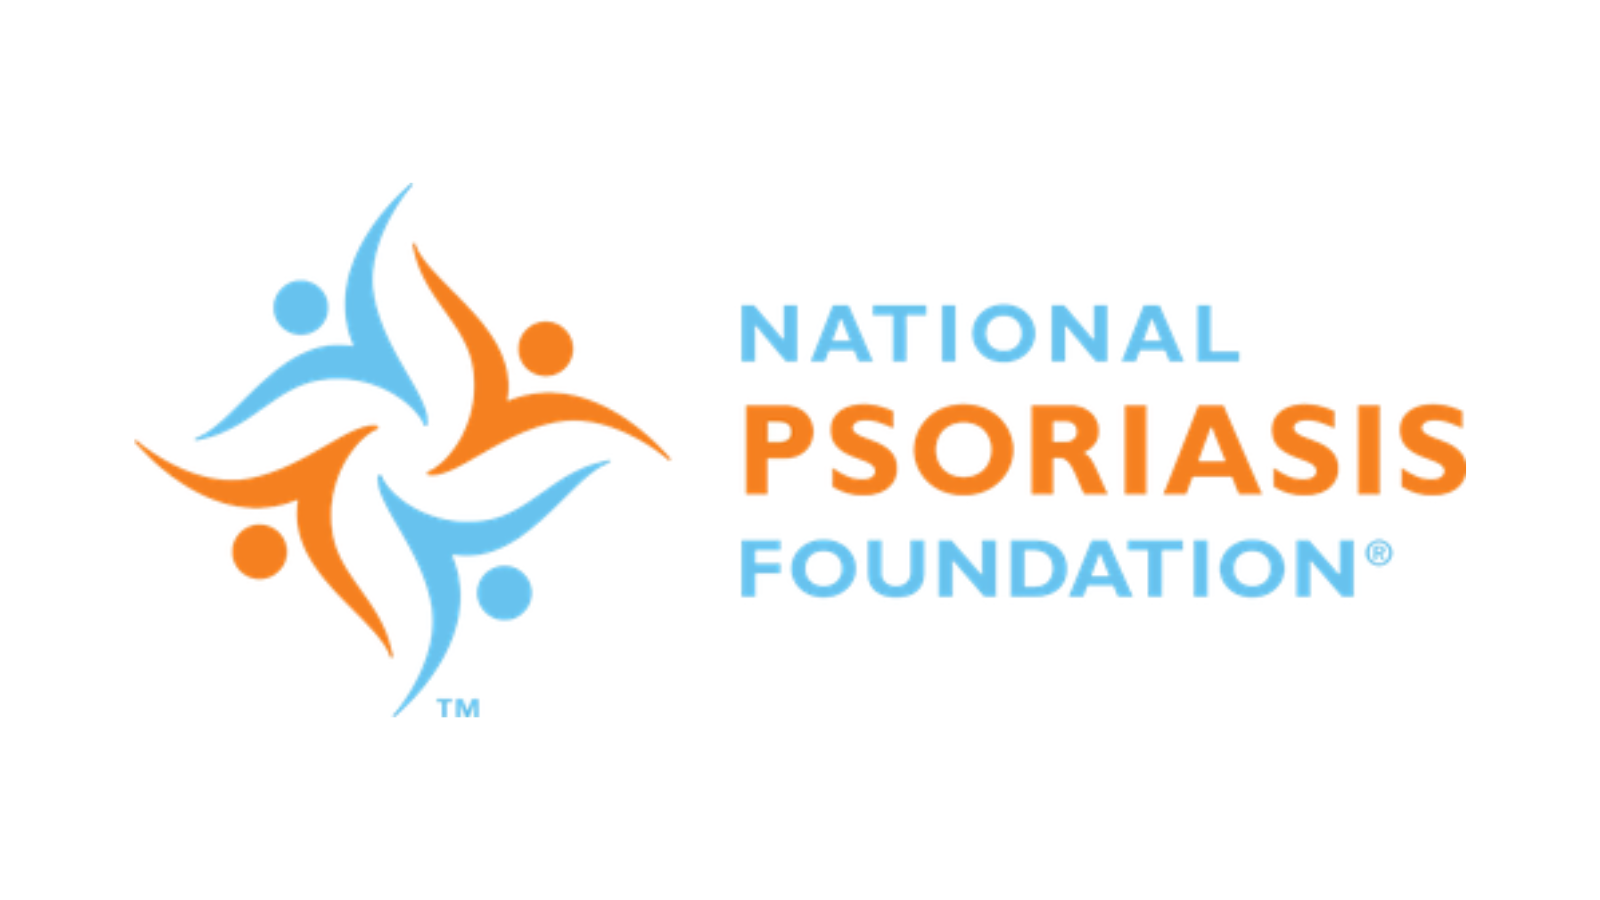 The National Psoriasis Foundation Selects the Happify Health Digital Health Platform, Kopa, As Official Online Community